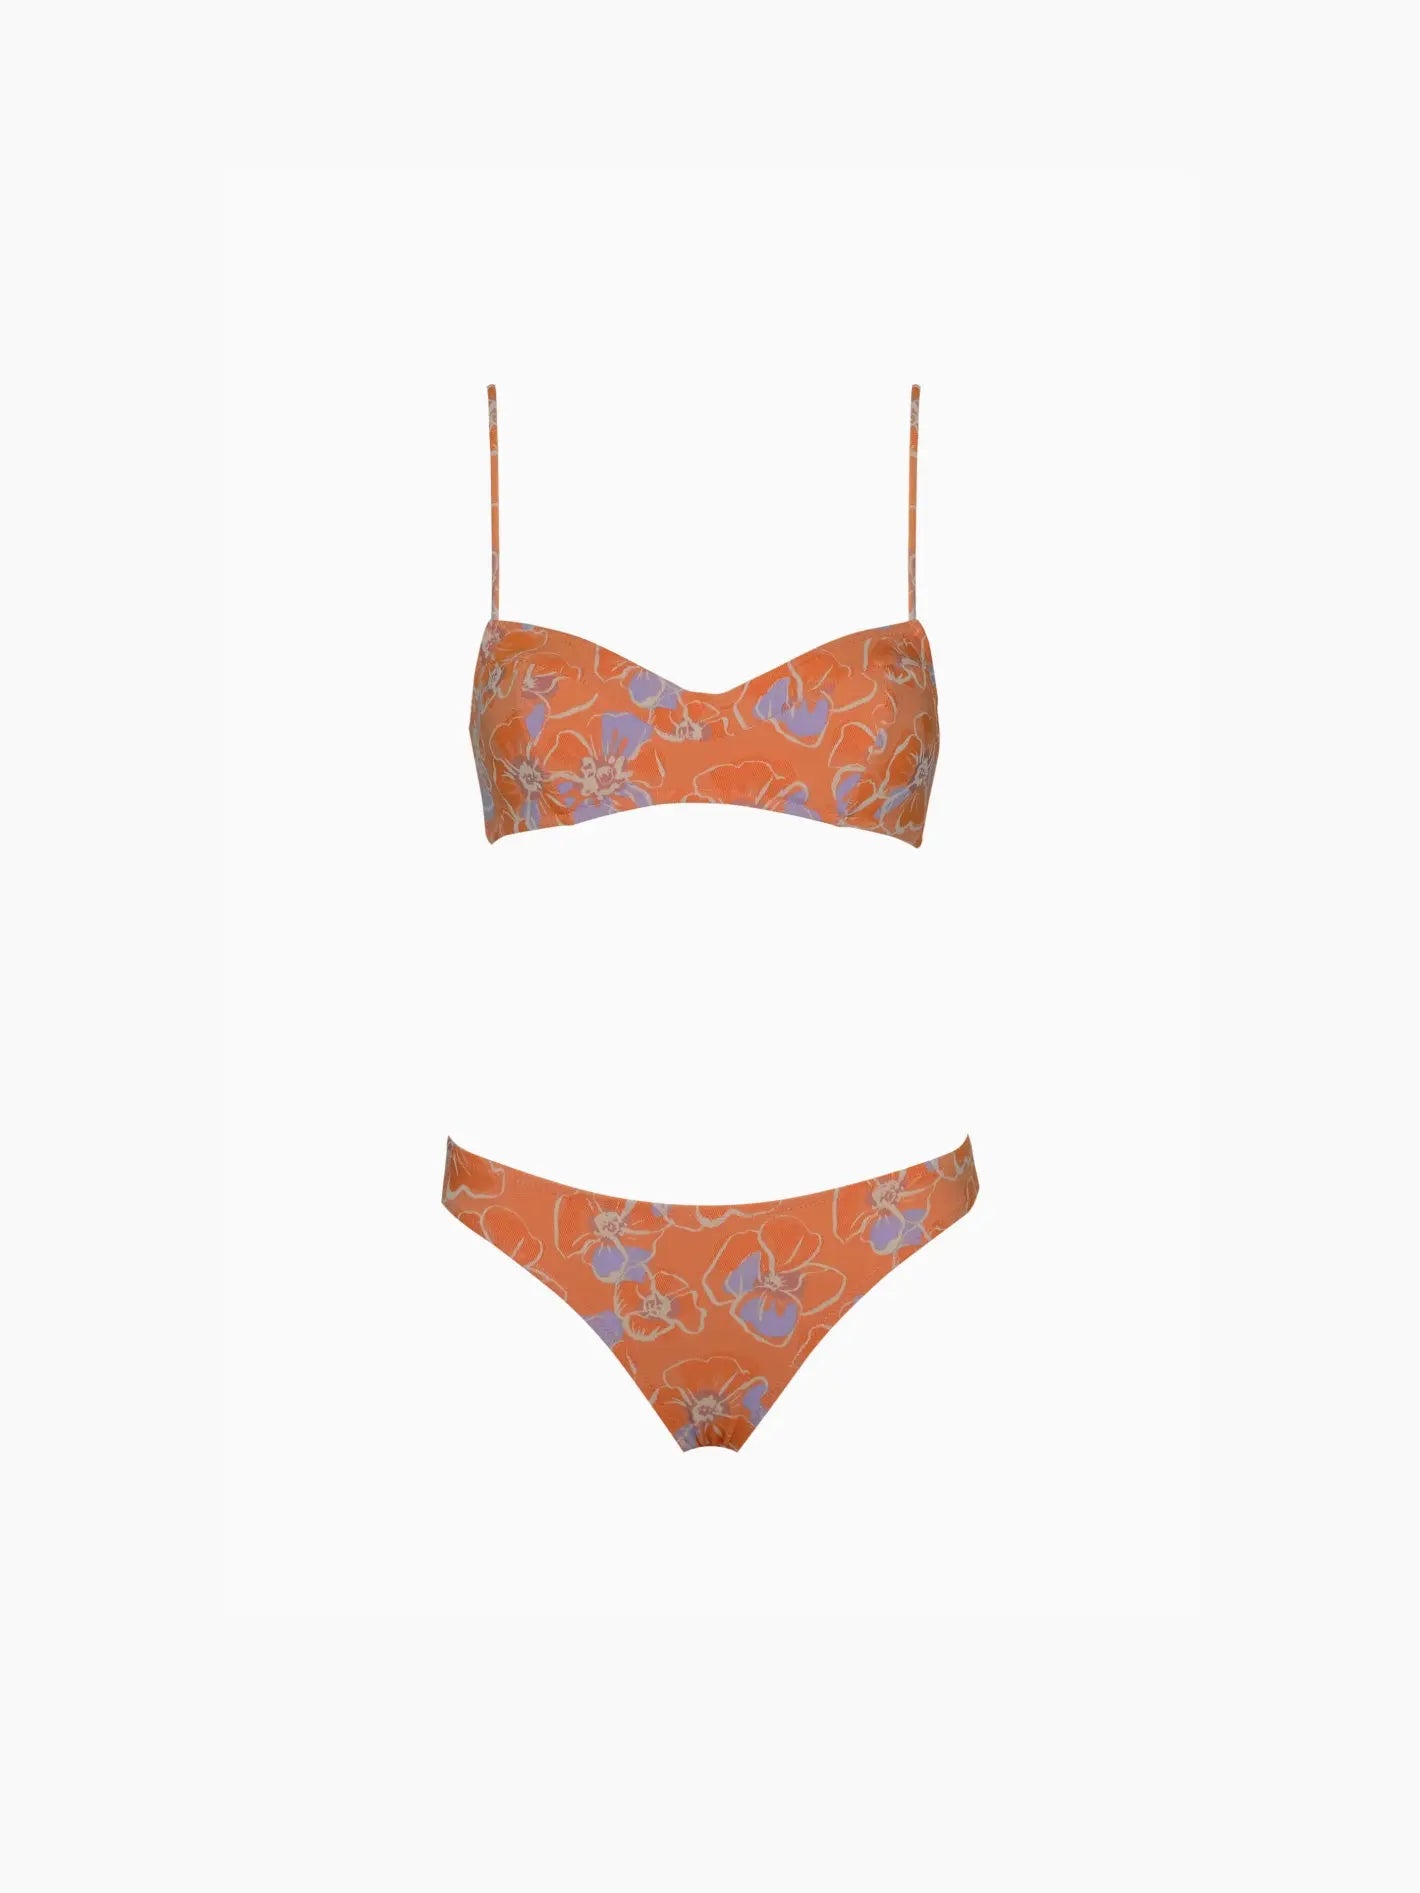 A Marais Bikini Mandarina with thin shoulder straps and a floral pattern. The top is a bandeau style, and the bottoms are classic bikini-cut. The floral design features shades of blue and white. Displayed against a plain white background, this stunning piece from Pale is available at Bassalstore in Barcelona.